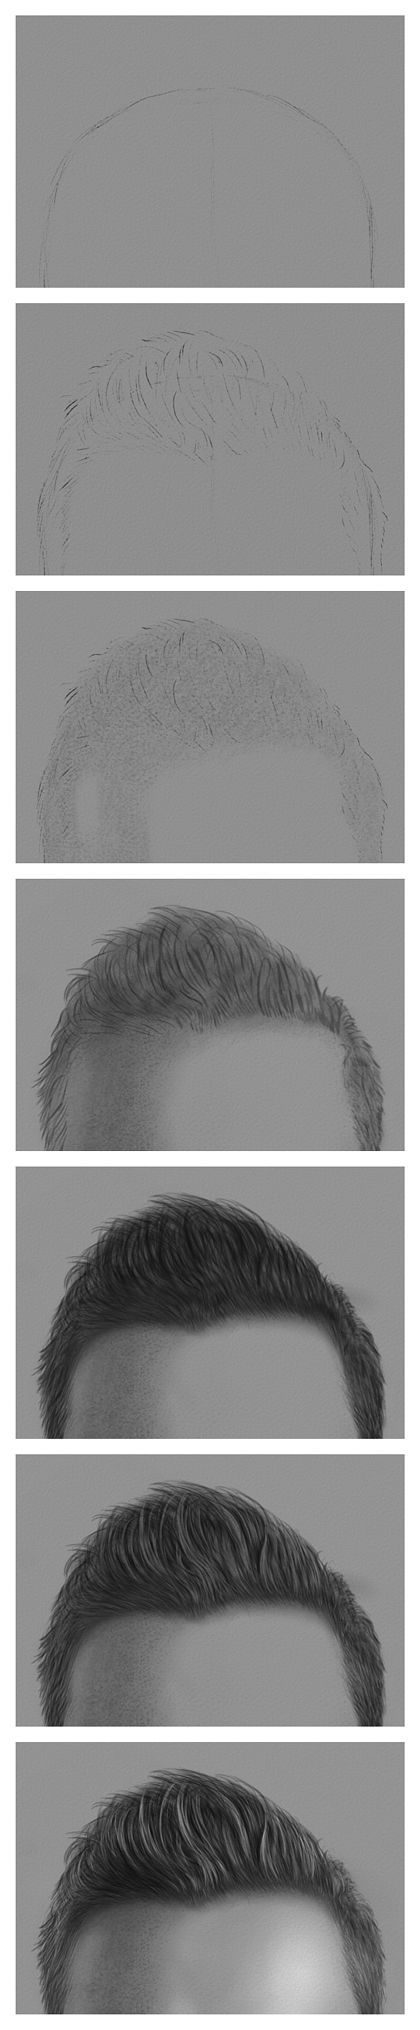 Drawing the Hair: A Step by Step Summary